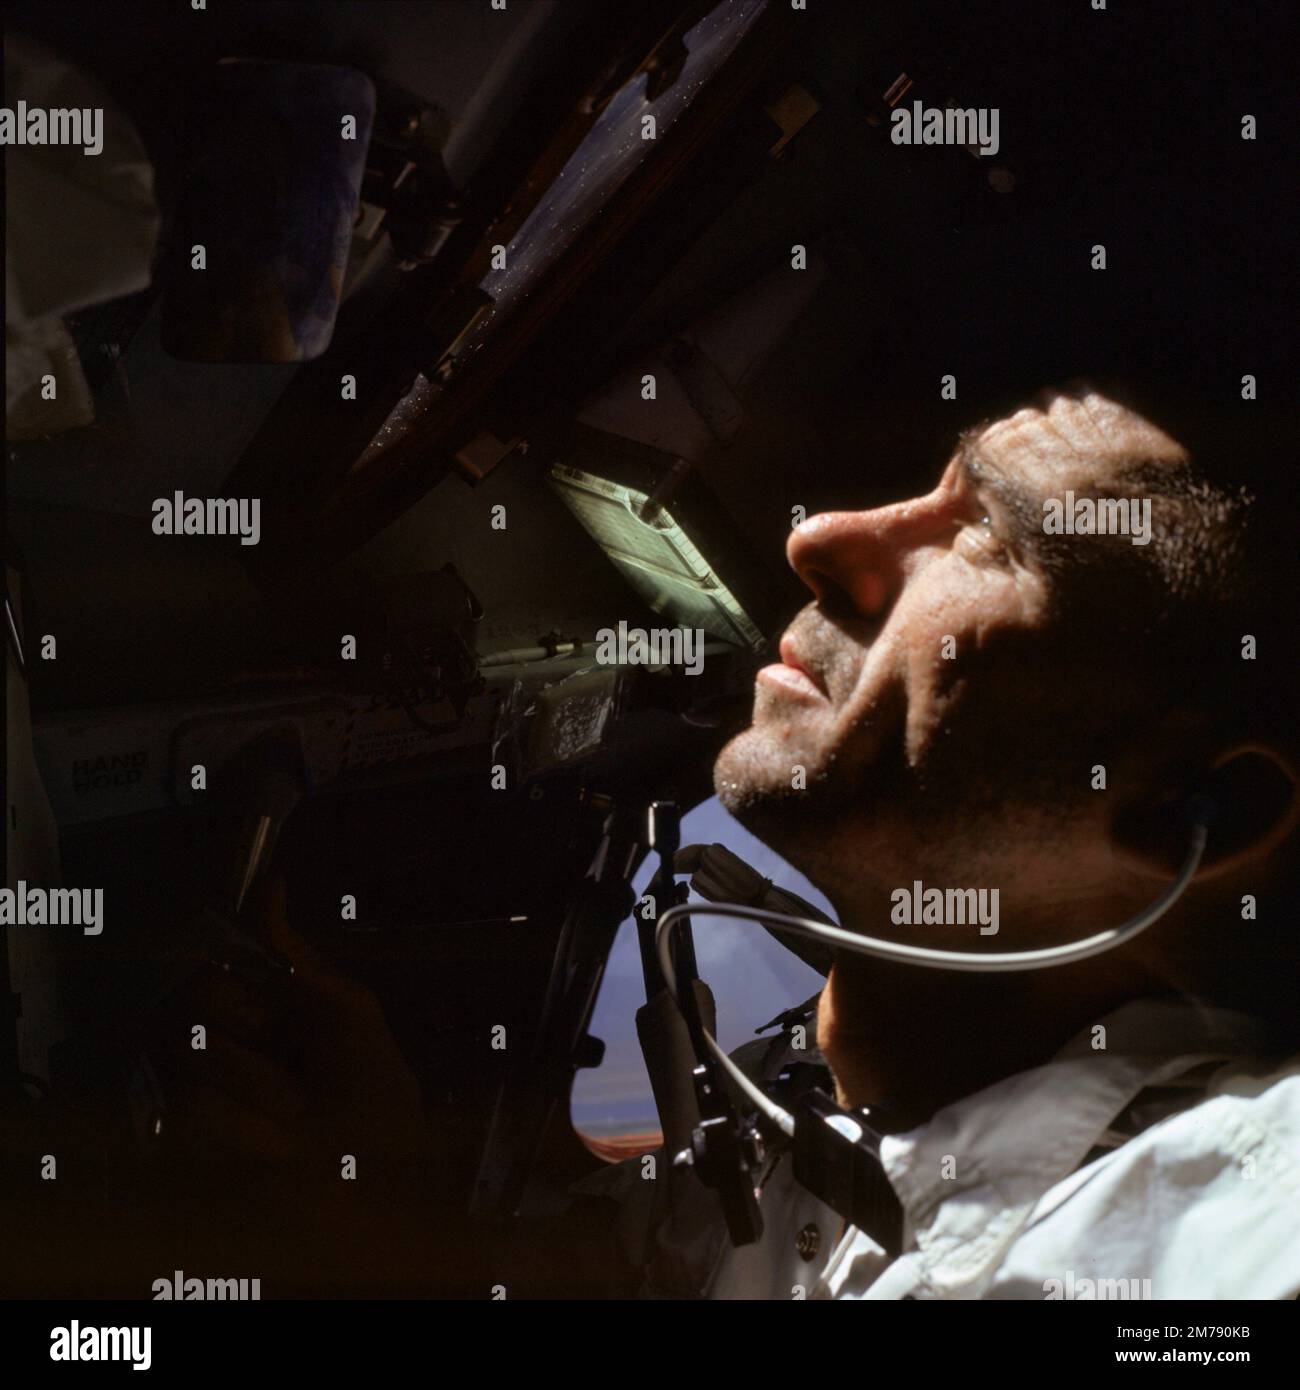 Earth Orbit, Earth Orbit. 11 October, 1968. NASA Apollo VII prime crew astronaut Walter Cunningham, looks out the window during the first day of flight in the Apollo capsule, October 11, 1968 in Earth Orbit. Cunningham died January 4, 2023 at 90-years-old, the last surviving member of the NASA Apollo 7 mission. Stock Photo